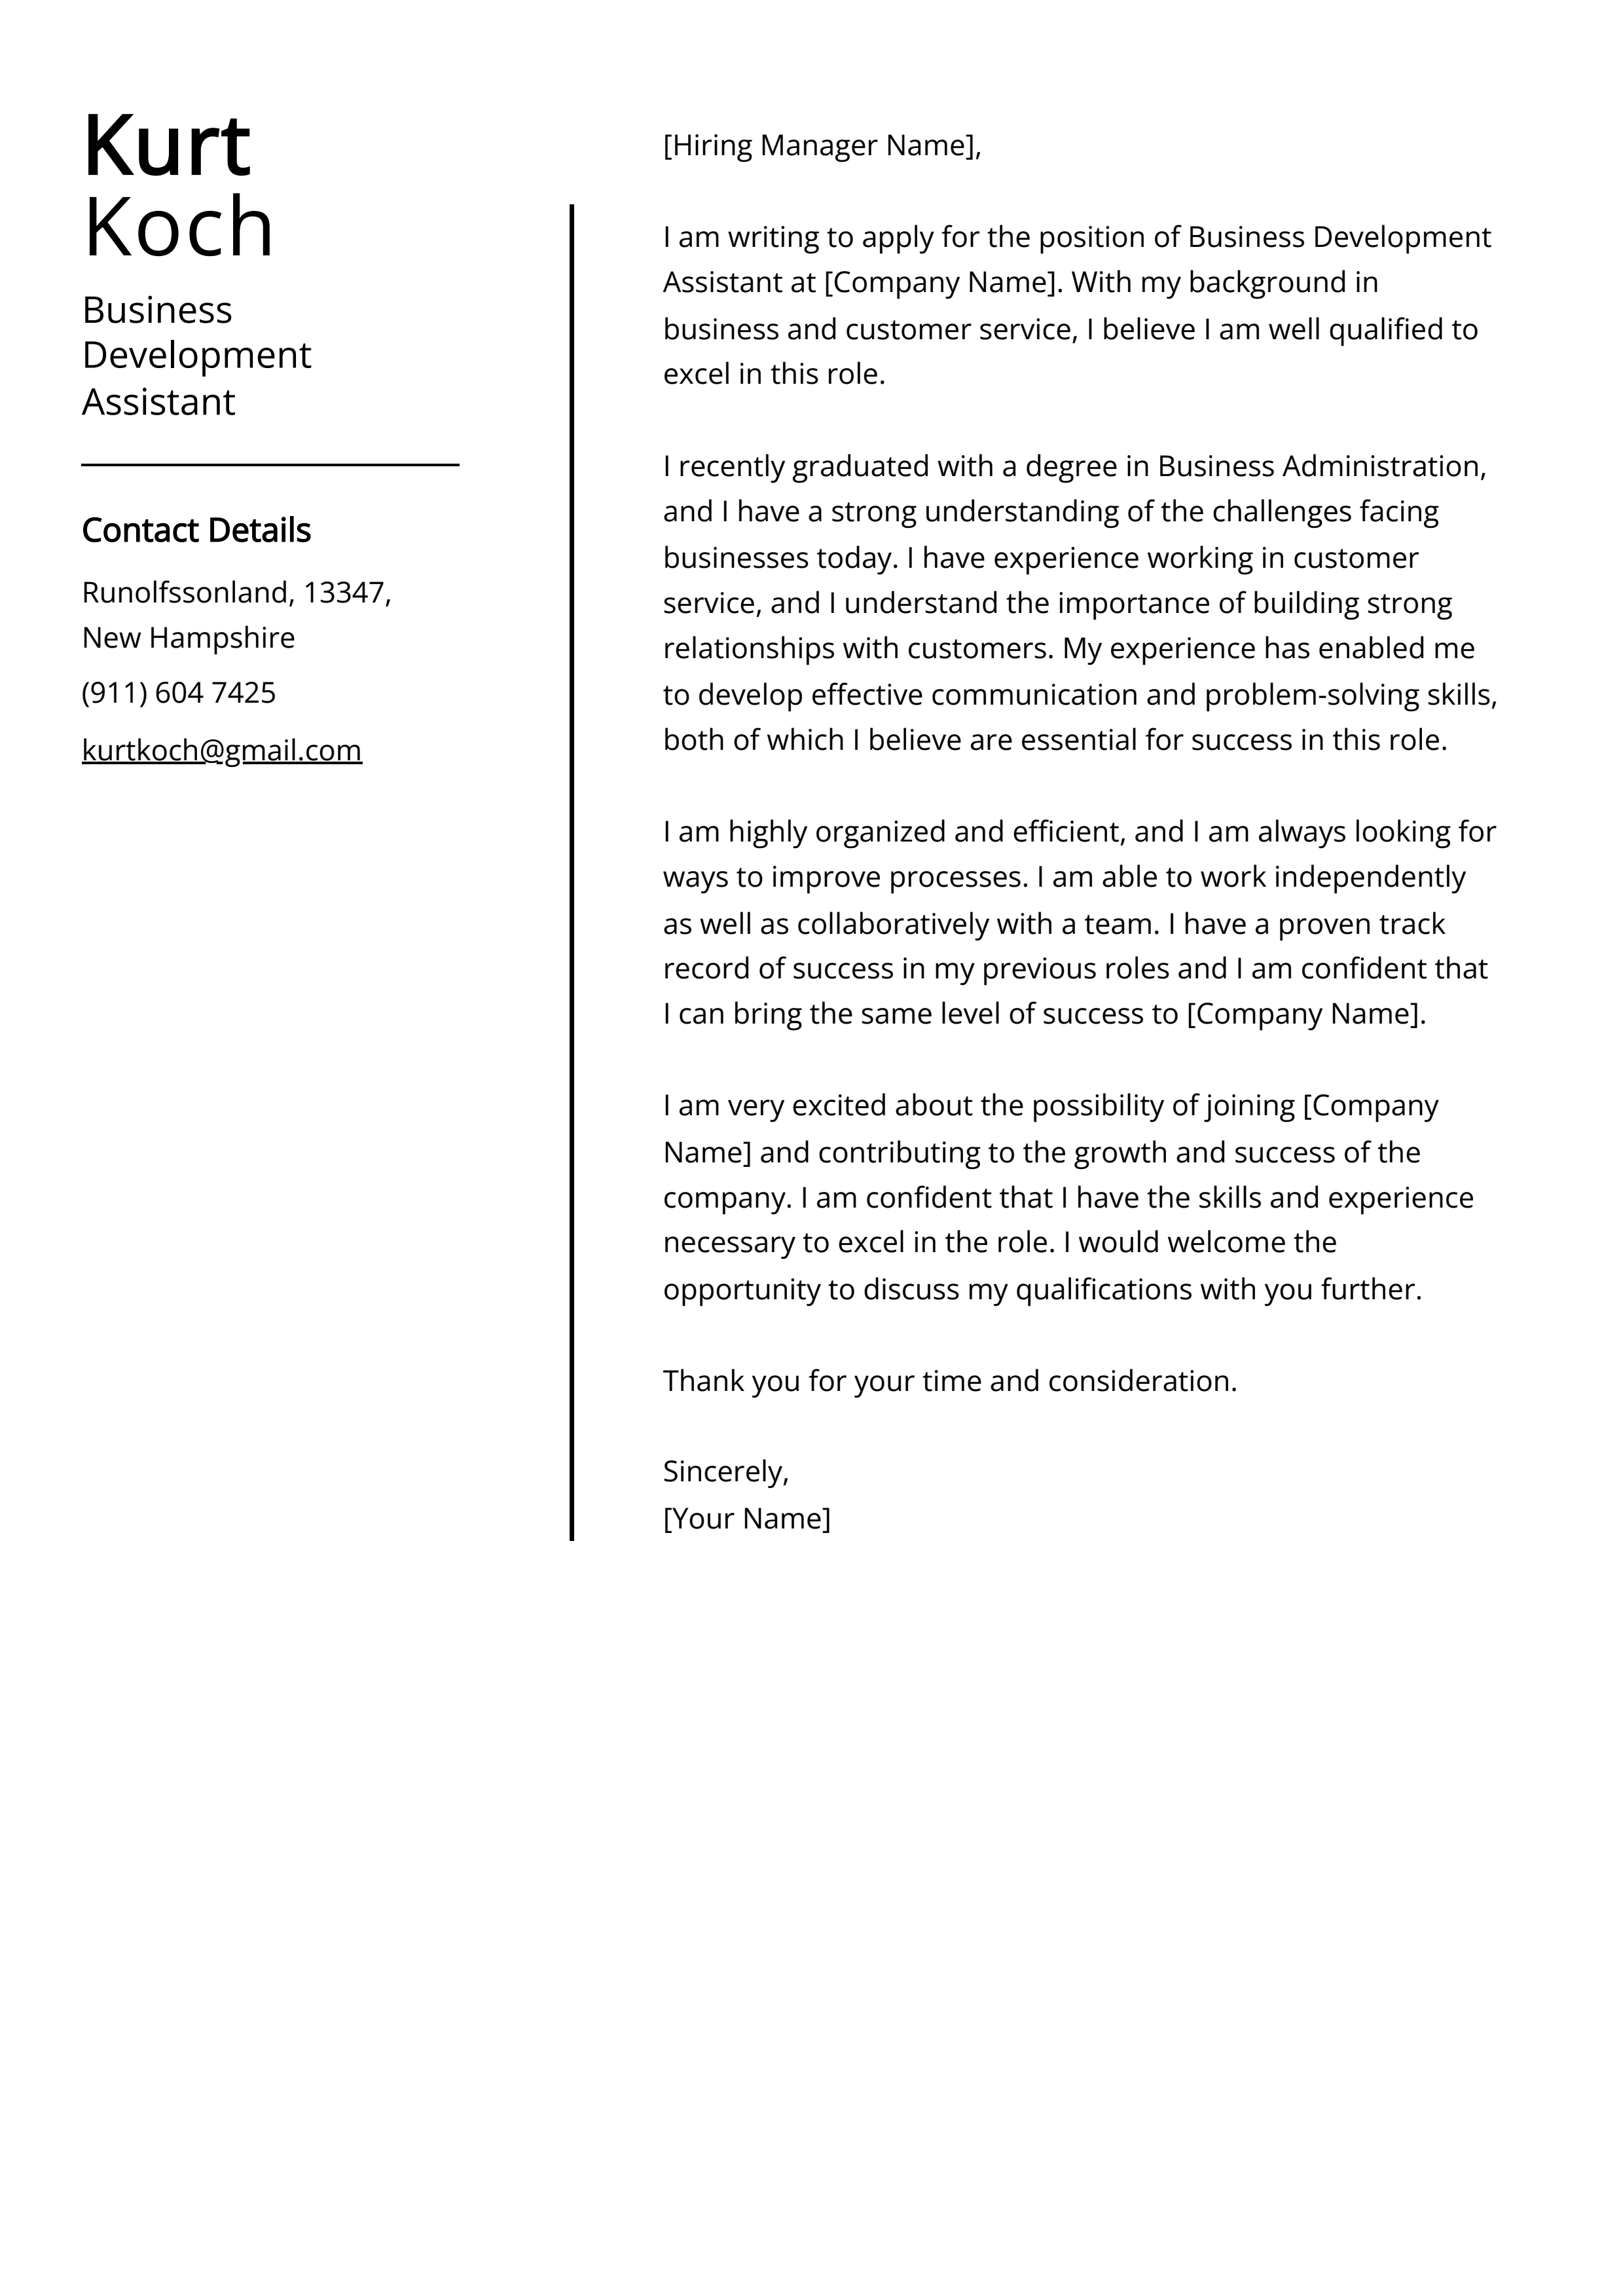 Business Development Assistant Cover Letter Example